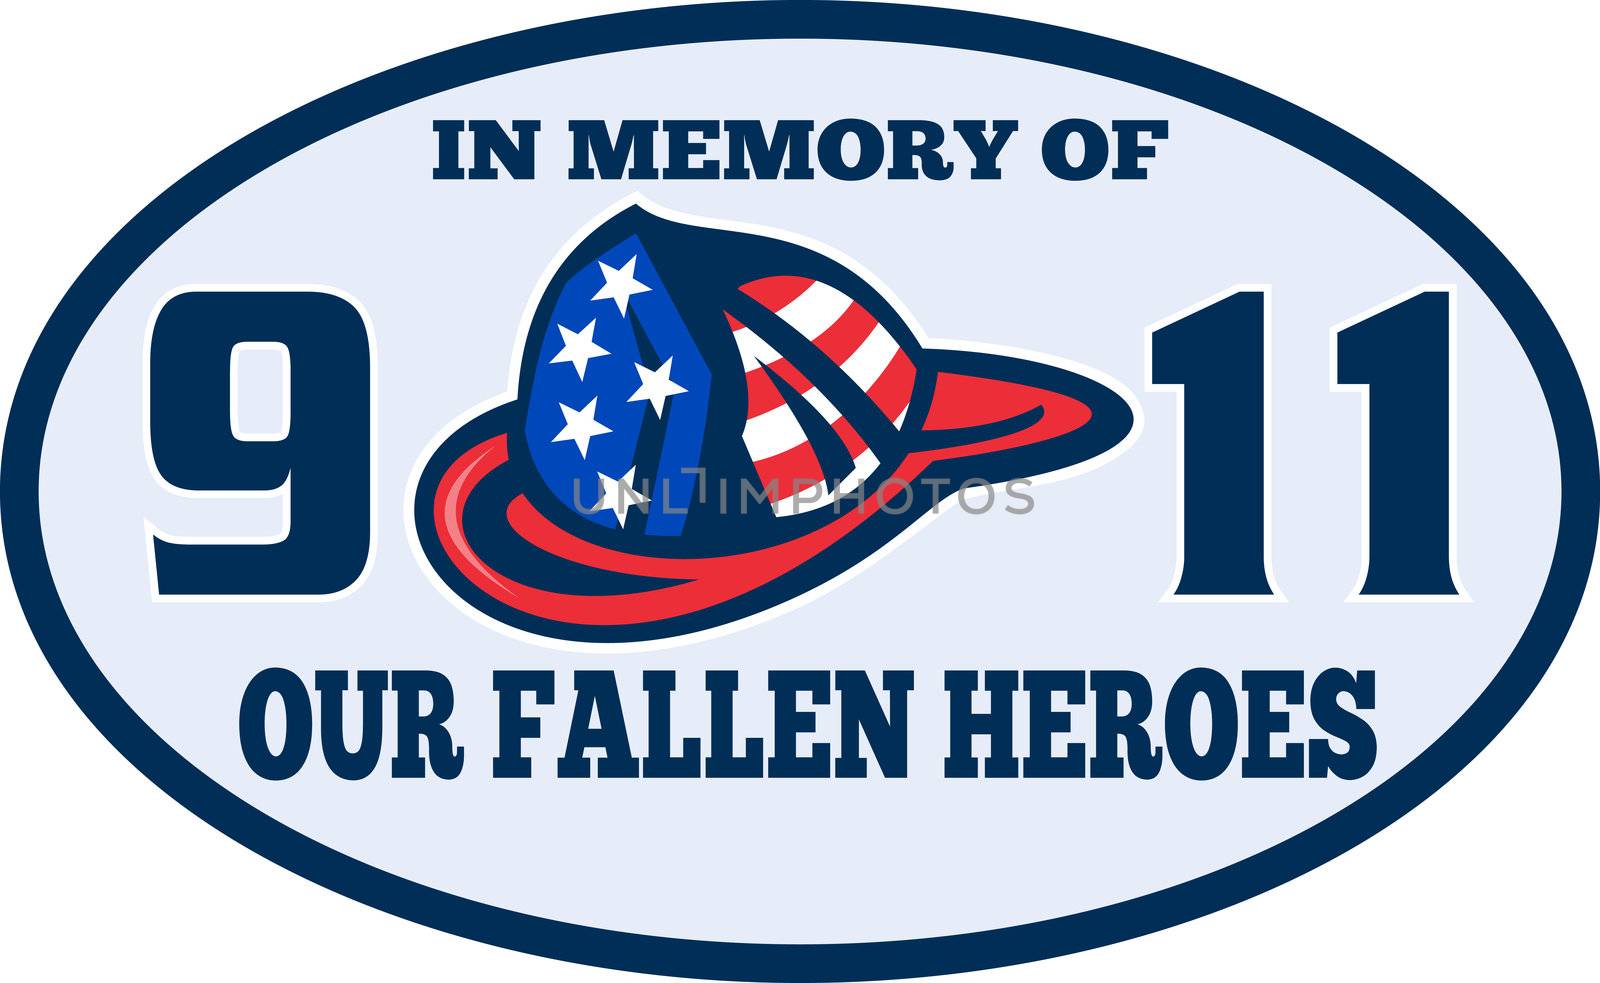 illustration of a fireman firefighter helmet with American flag and words " in memory of 9-11 our fallen heroes"